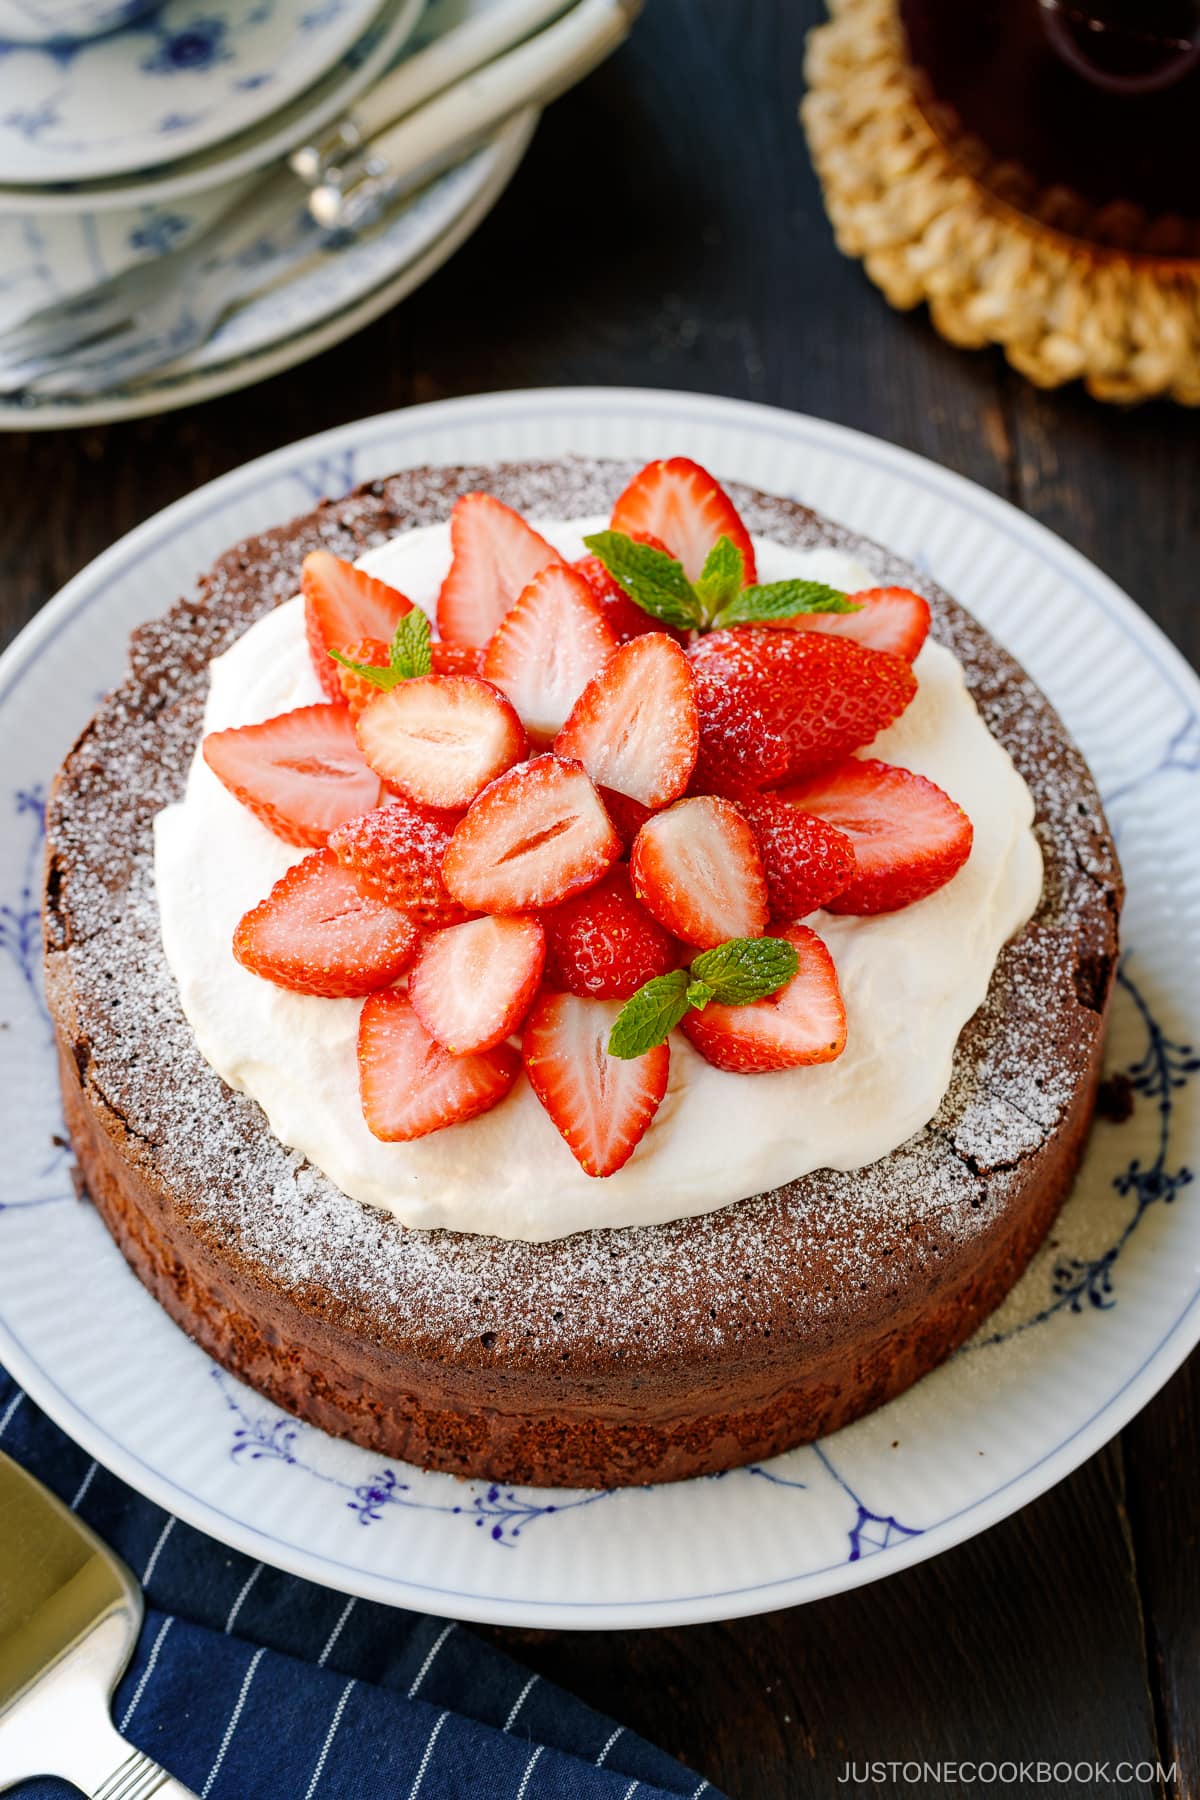 A large plate containing Chocolate Gateau (Chocolate Cake) dusted with powdered sugar and decorated with whipped cream and strawberries.